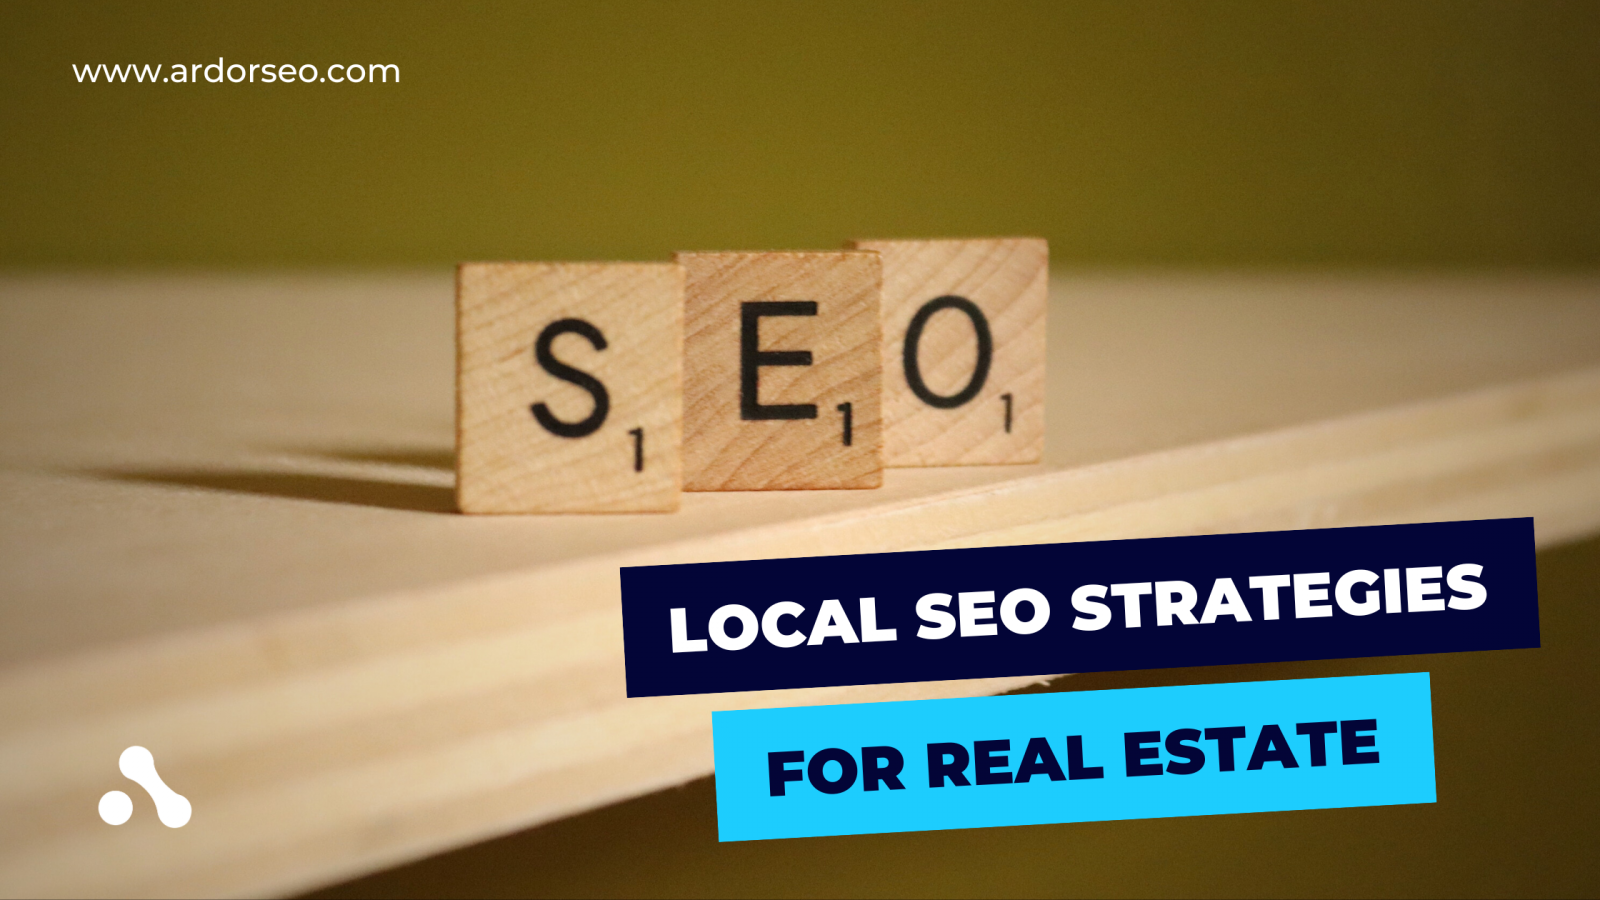 Dominate search results with these local SEO tips.